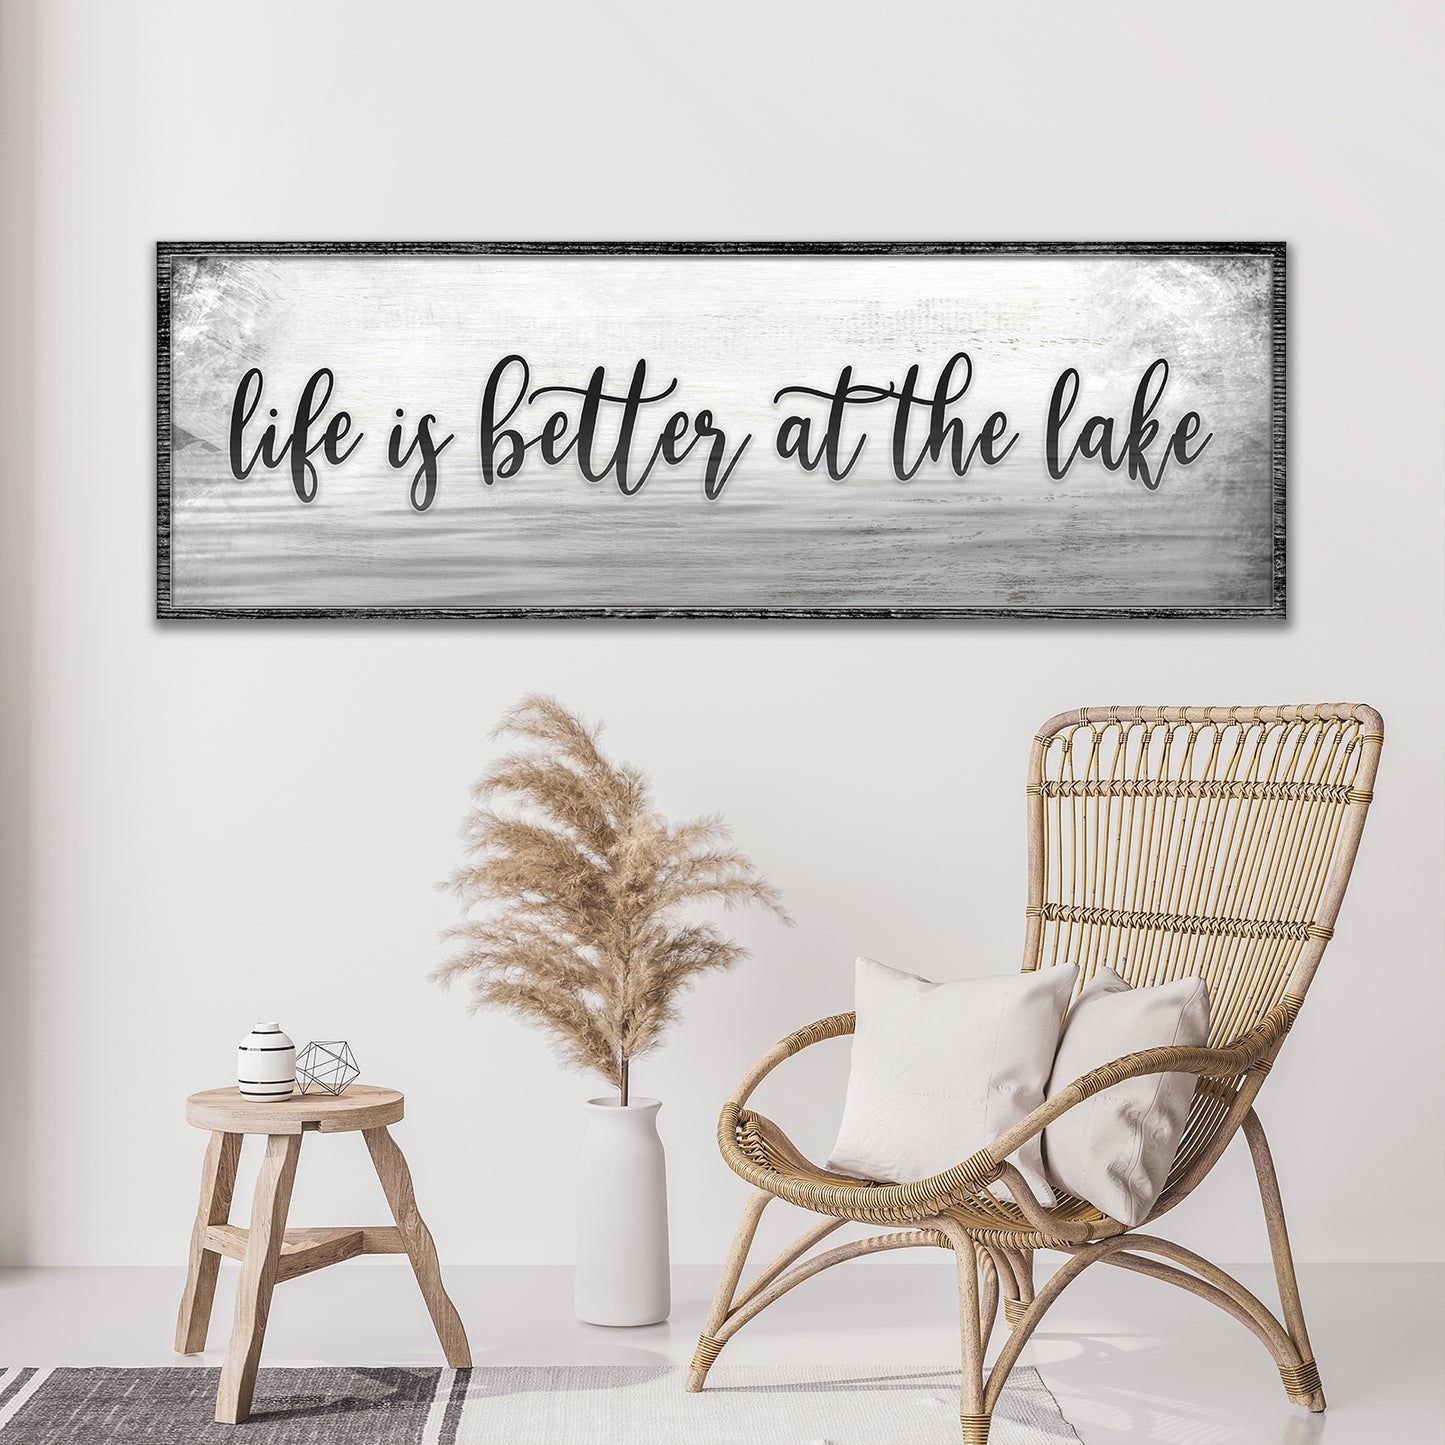 Life is Better at the Lake Sign - Image by Tailored Canvases